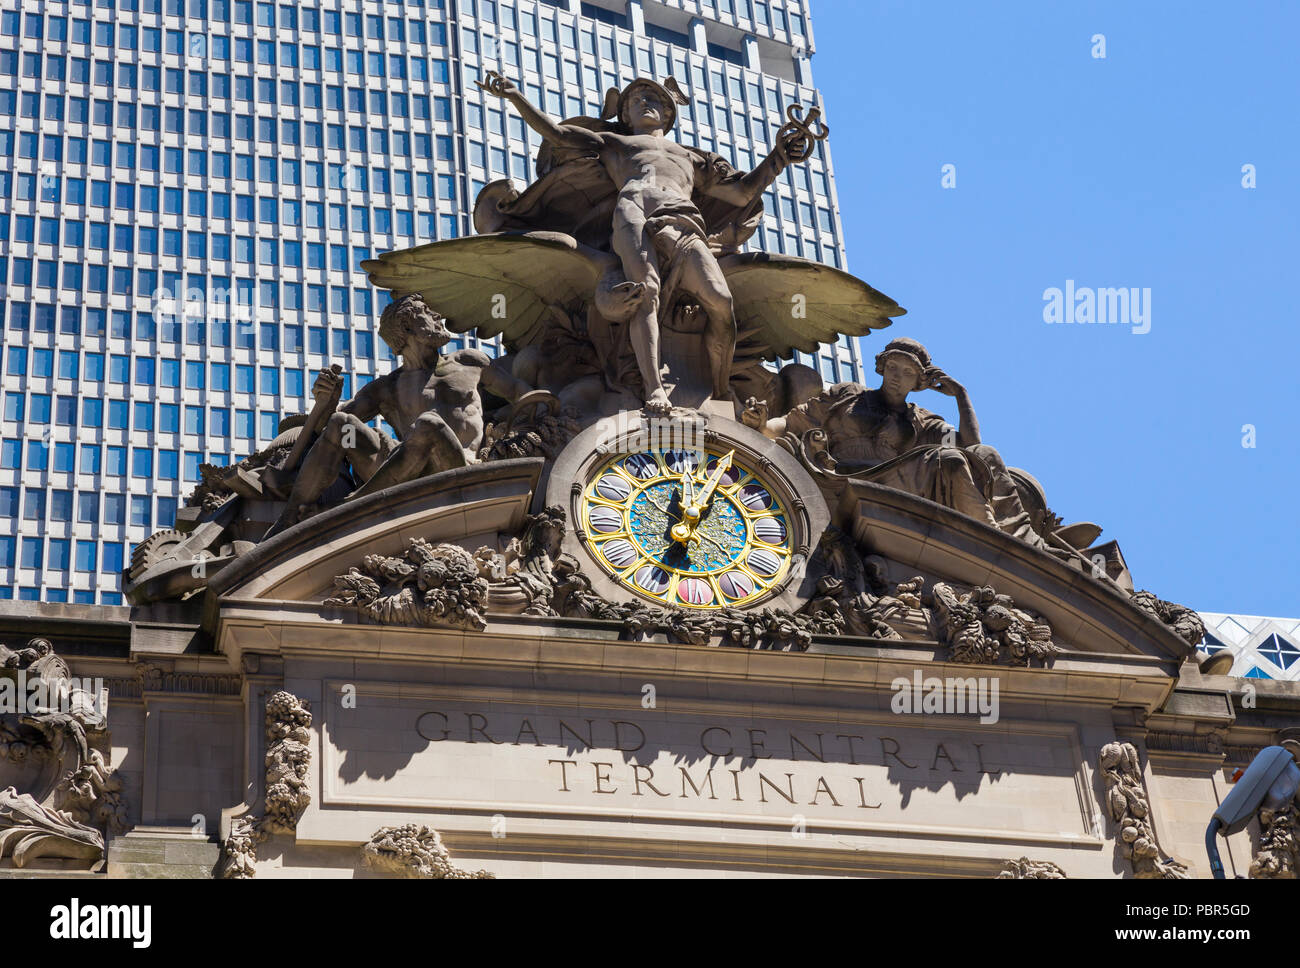 Grand Central Terminal sculptures and clock (Glory of Commerce), New York, USA Stock Photo